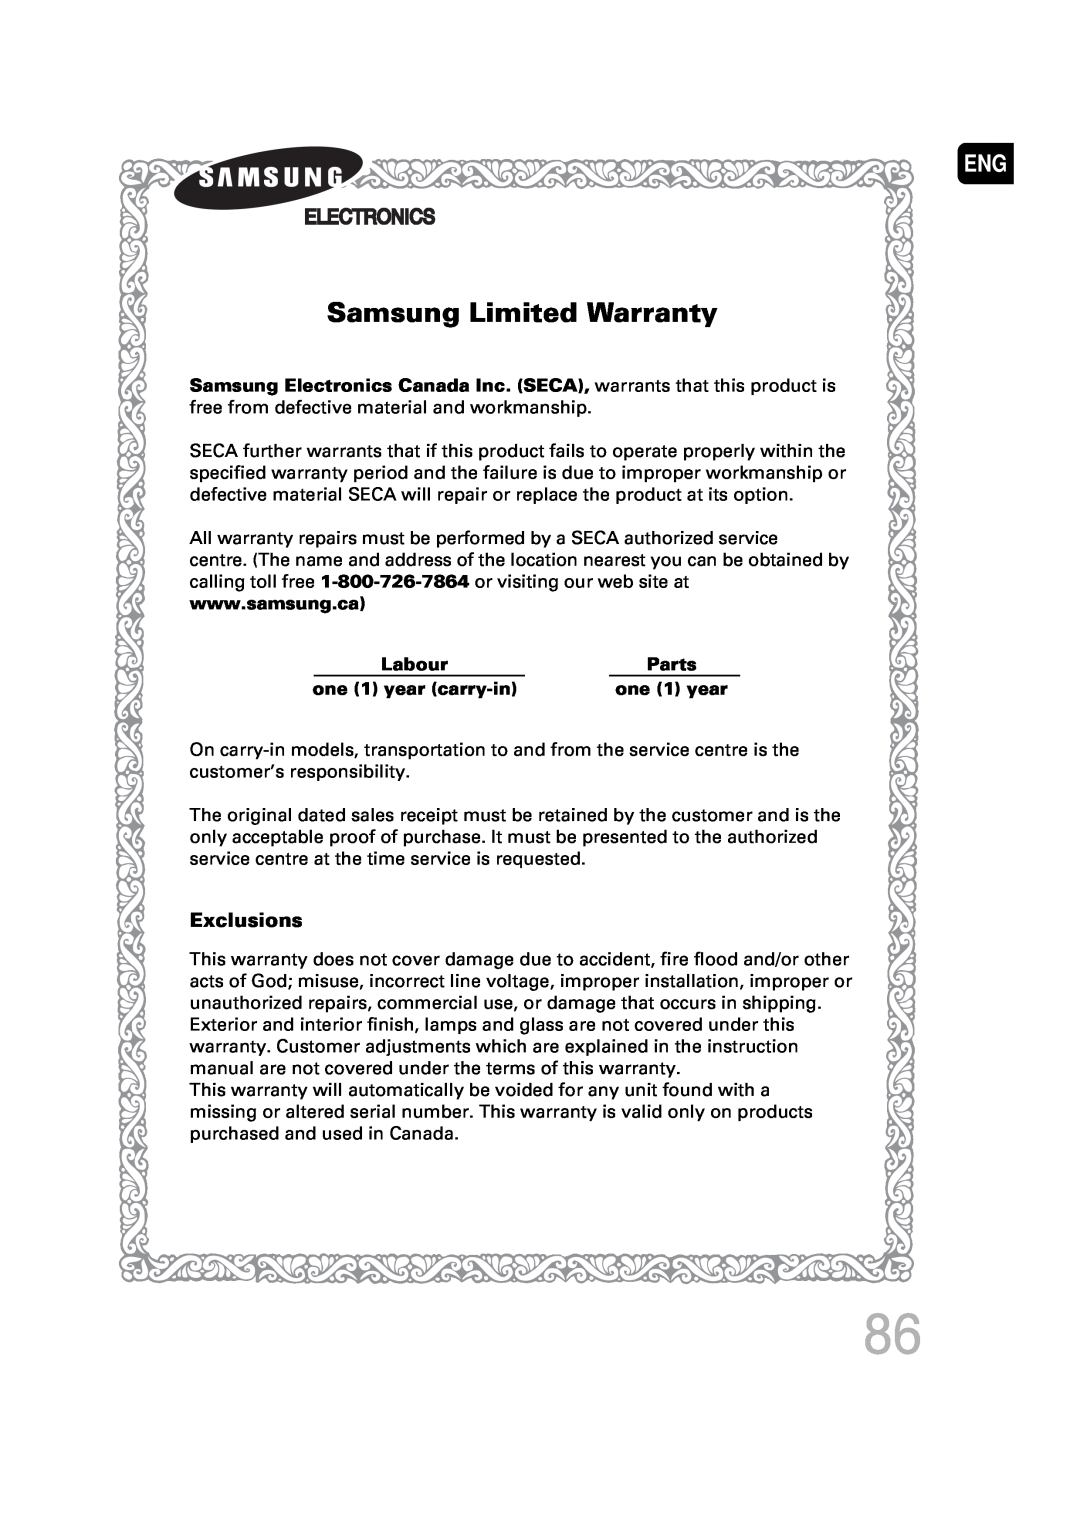 Samsung SDSM-EX, P1200-SECA, AH68-01720S manual Samsung Limited Warranty, Exclusions, Labour, Parts, one 1 year carry-in 